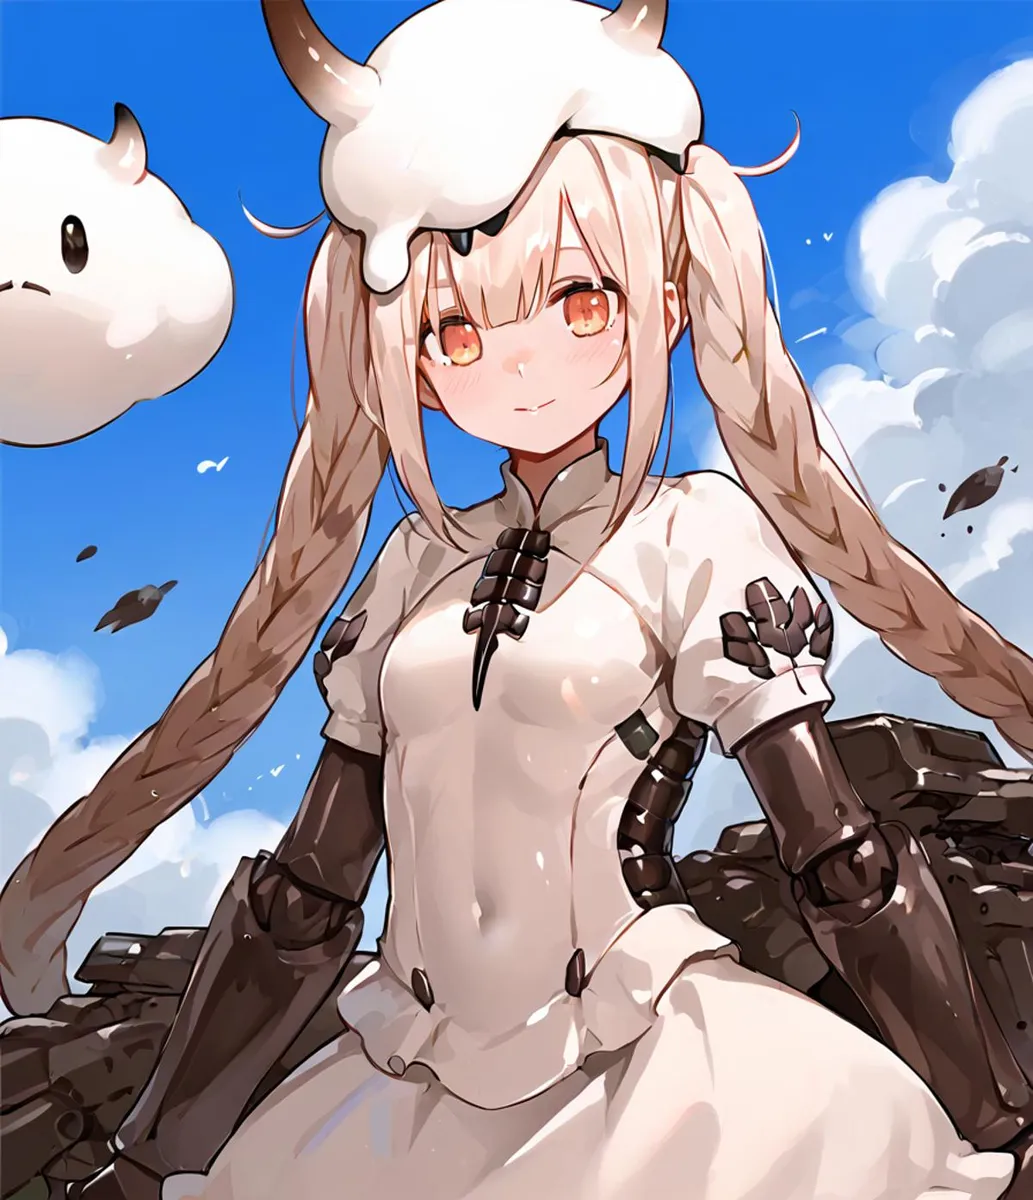 Cute anime girl with long blonde braids, wearing a white outfit, horned hat, and mechanical arm guards in a fantasy setting. AI generated image using Stable Diffusion.